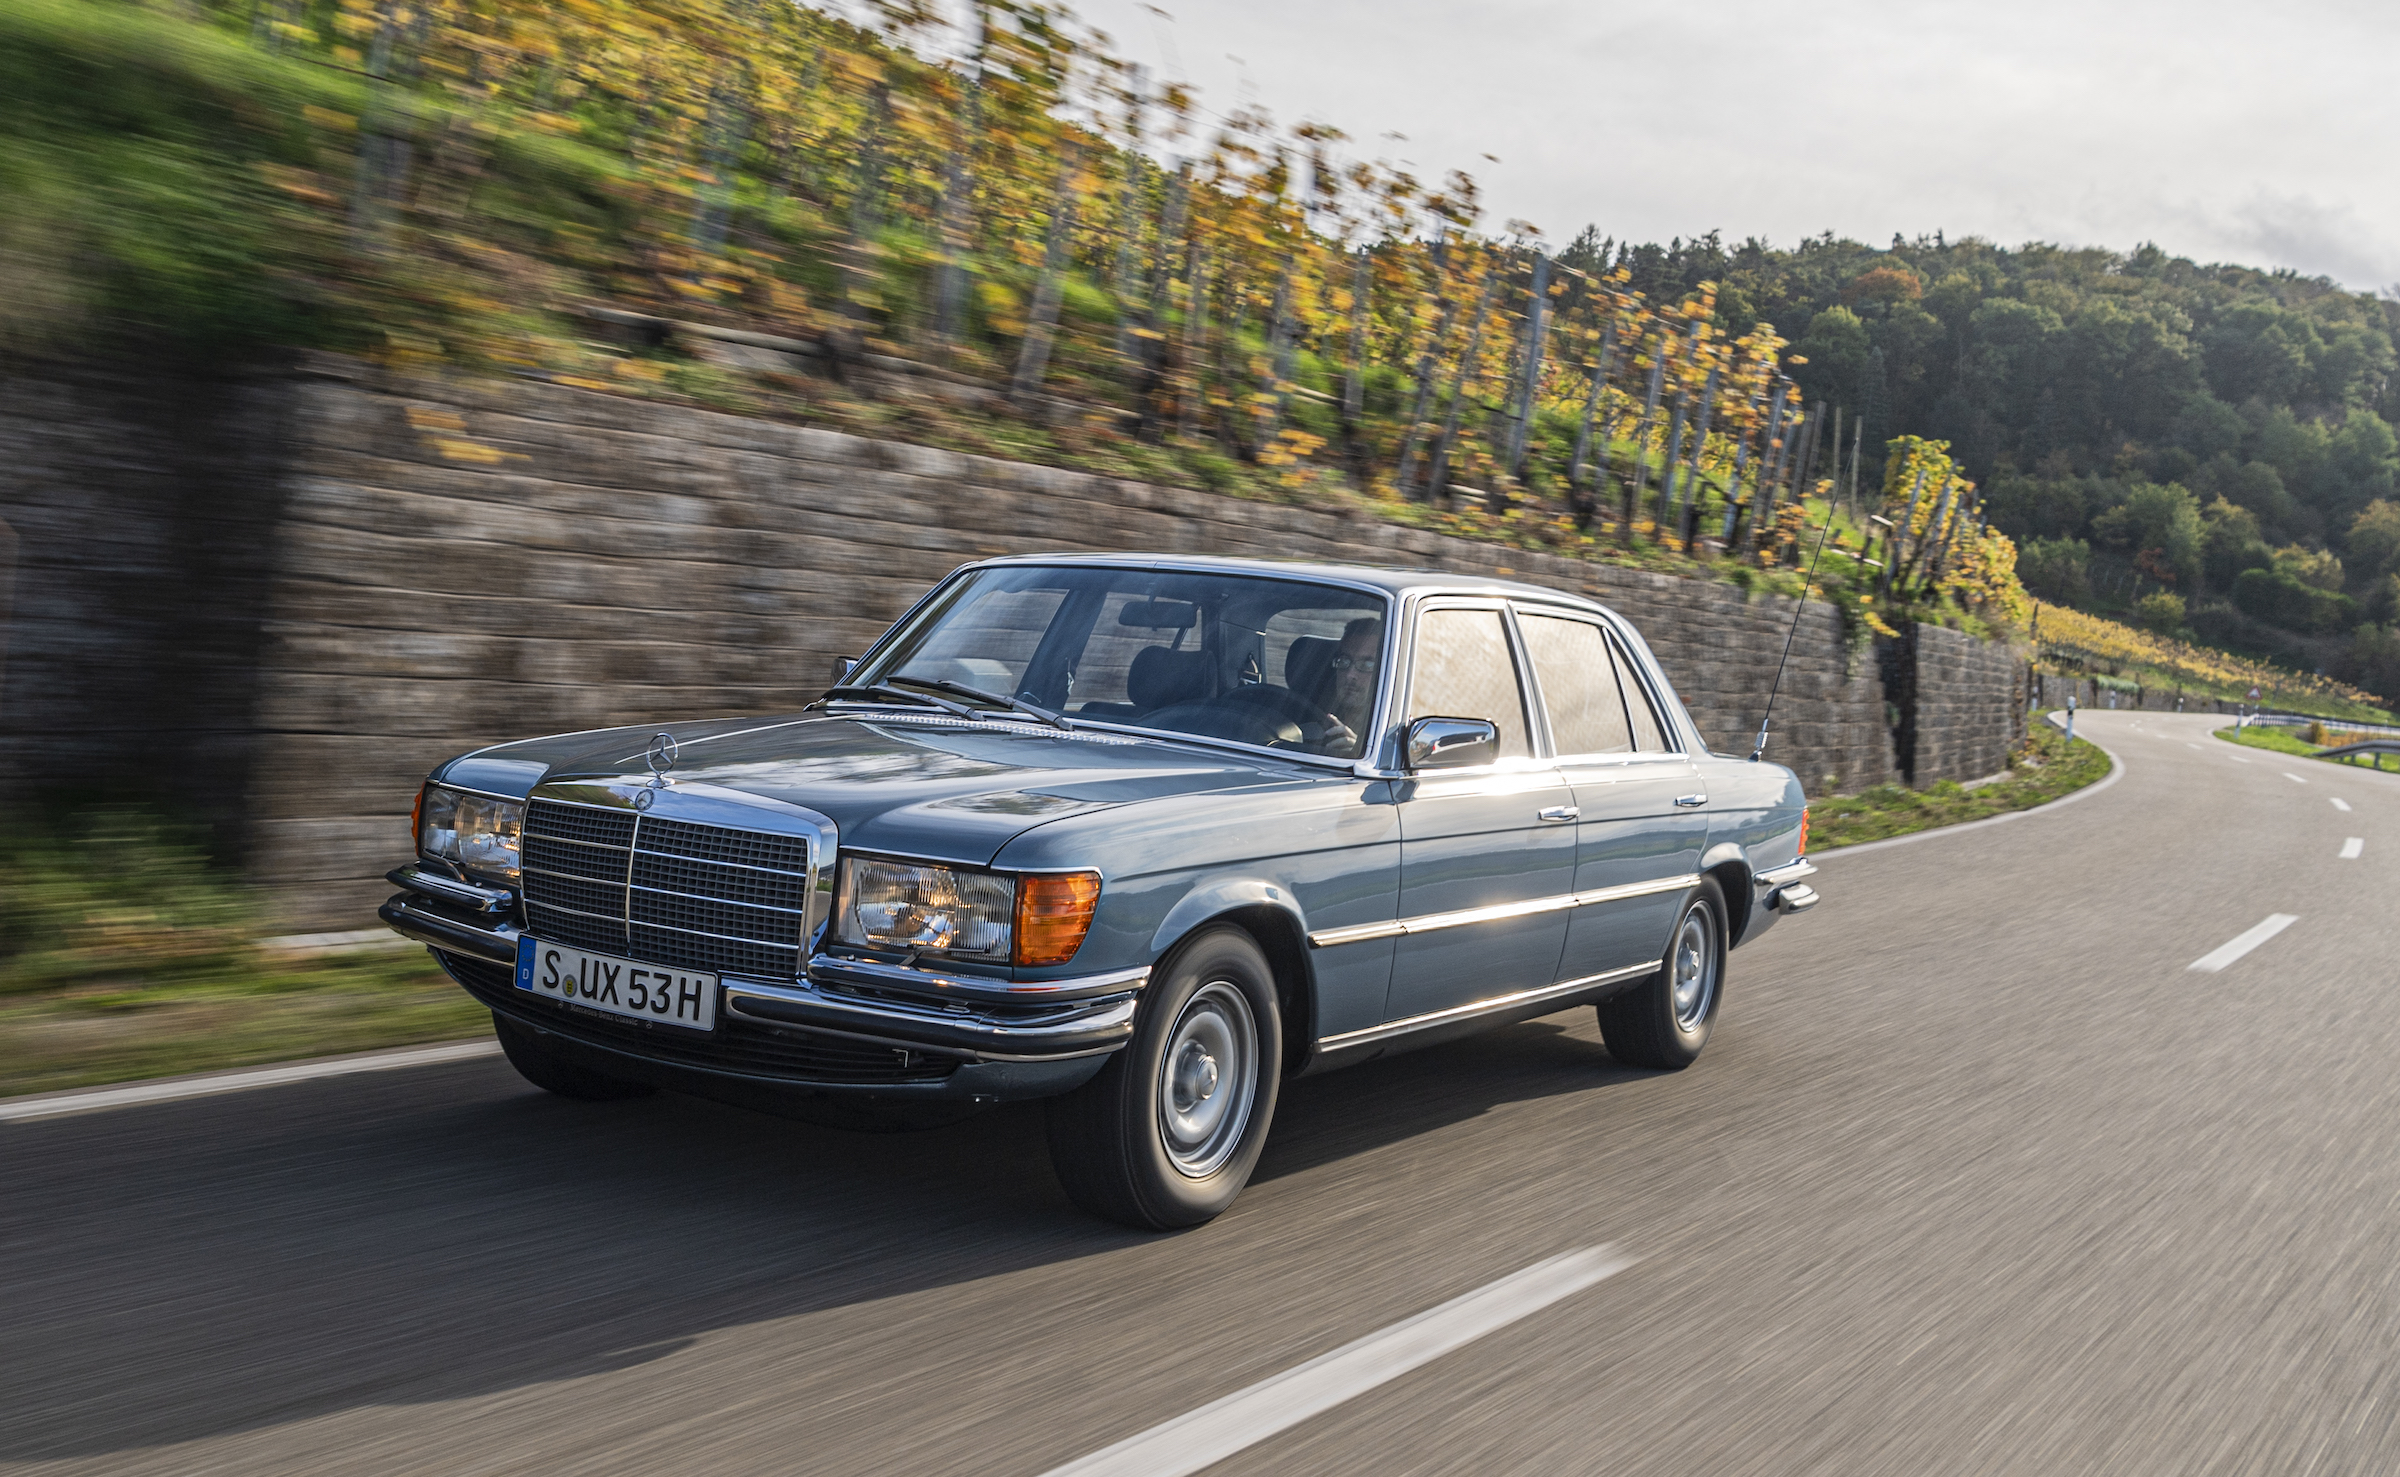 W116: Driving the Mercedes S-class that defined the luxury car